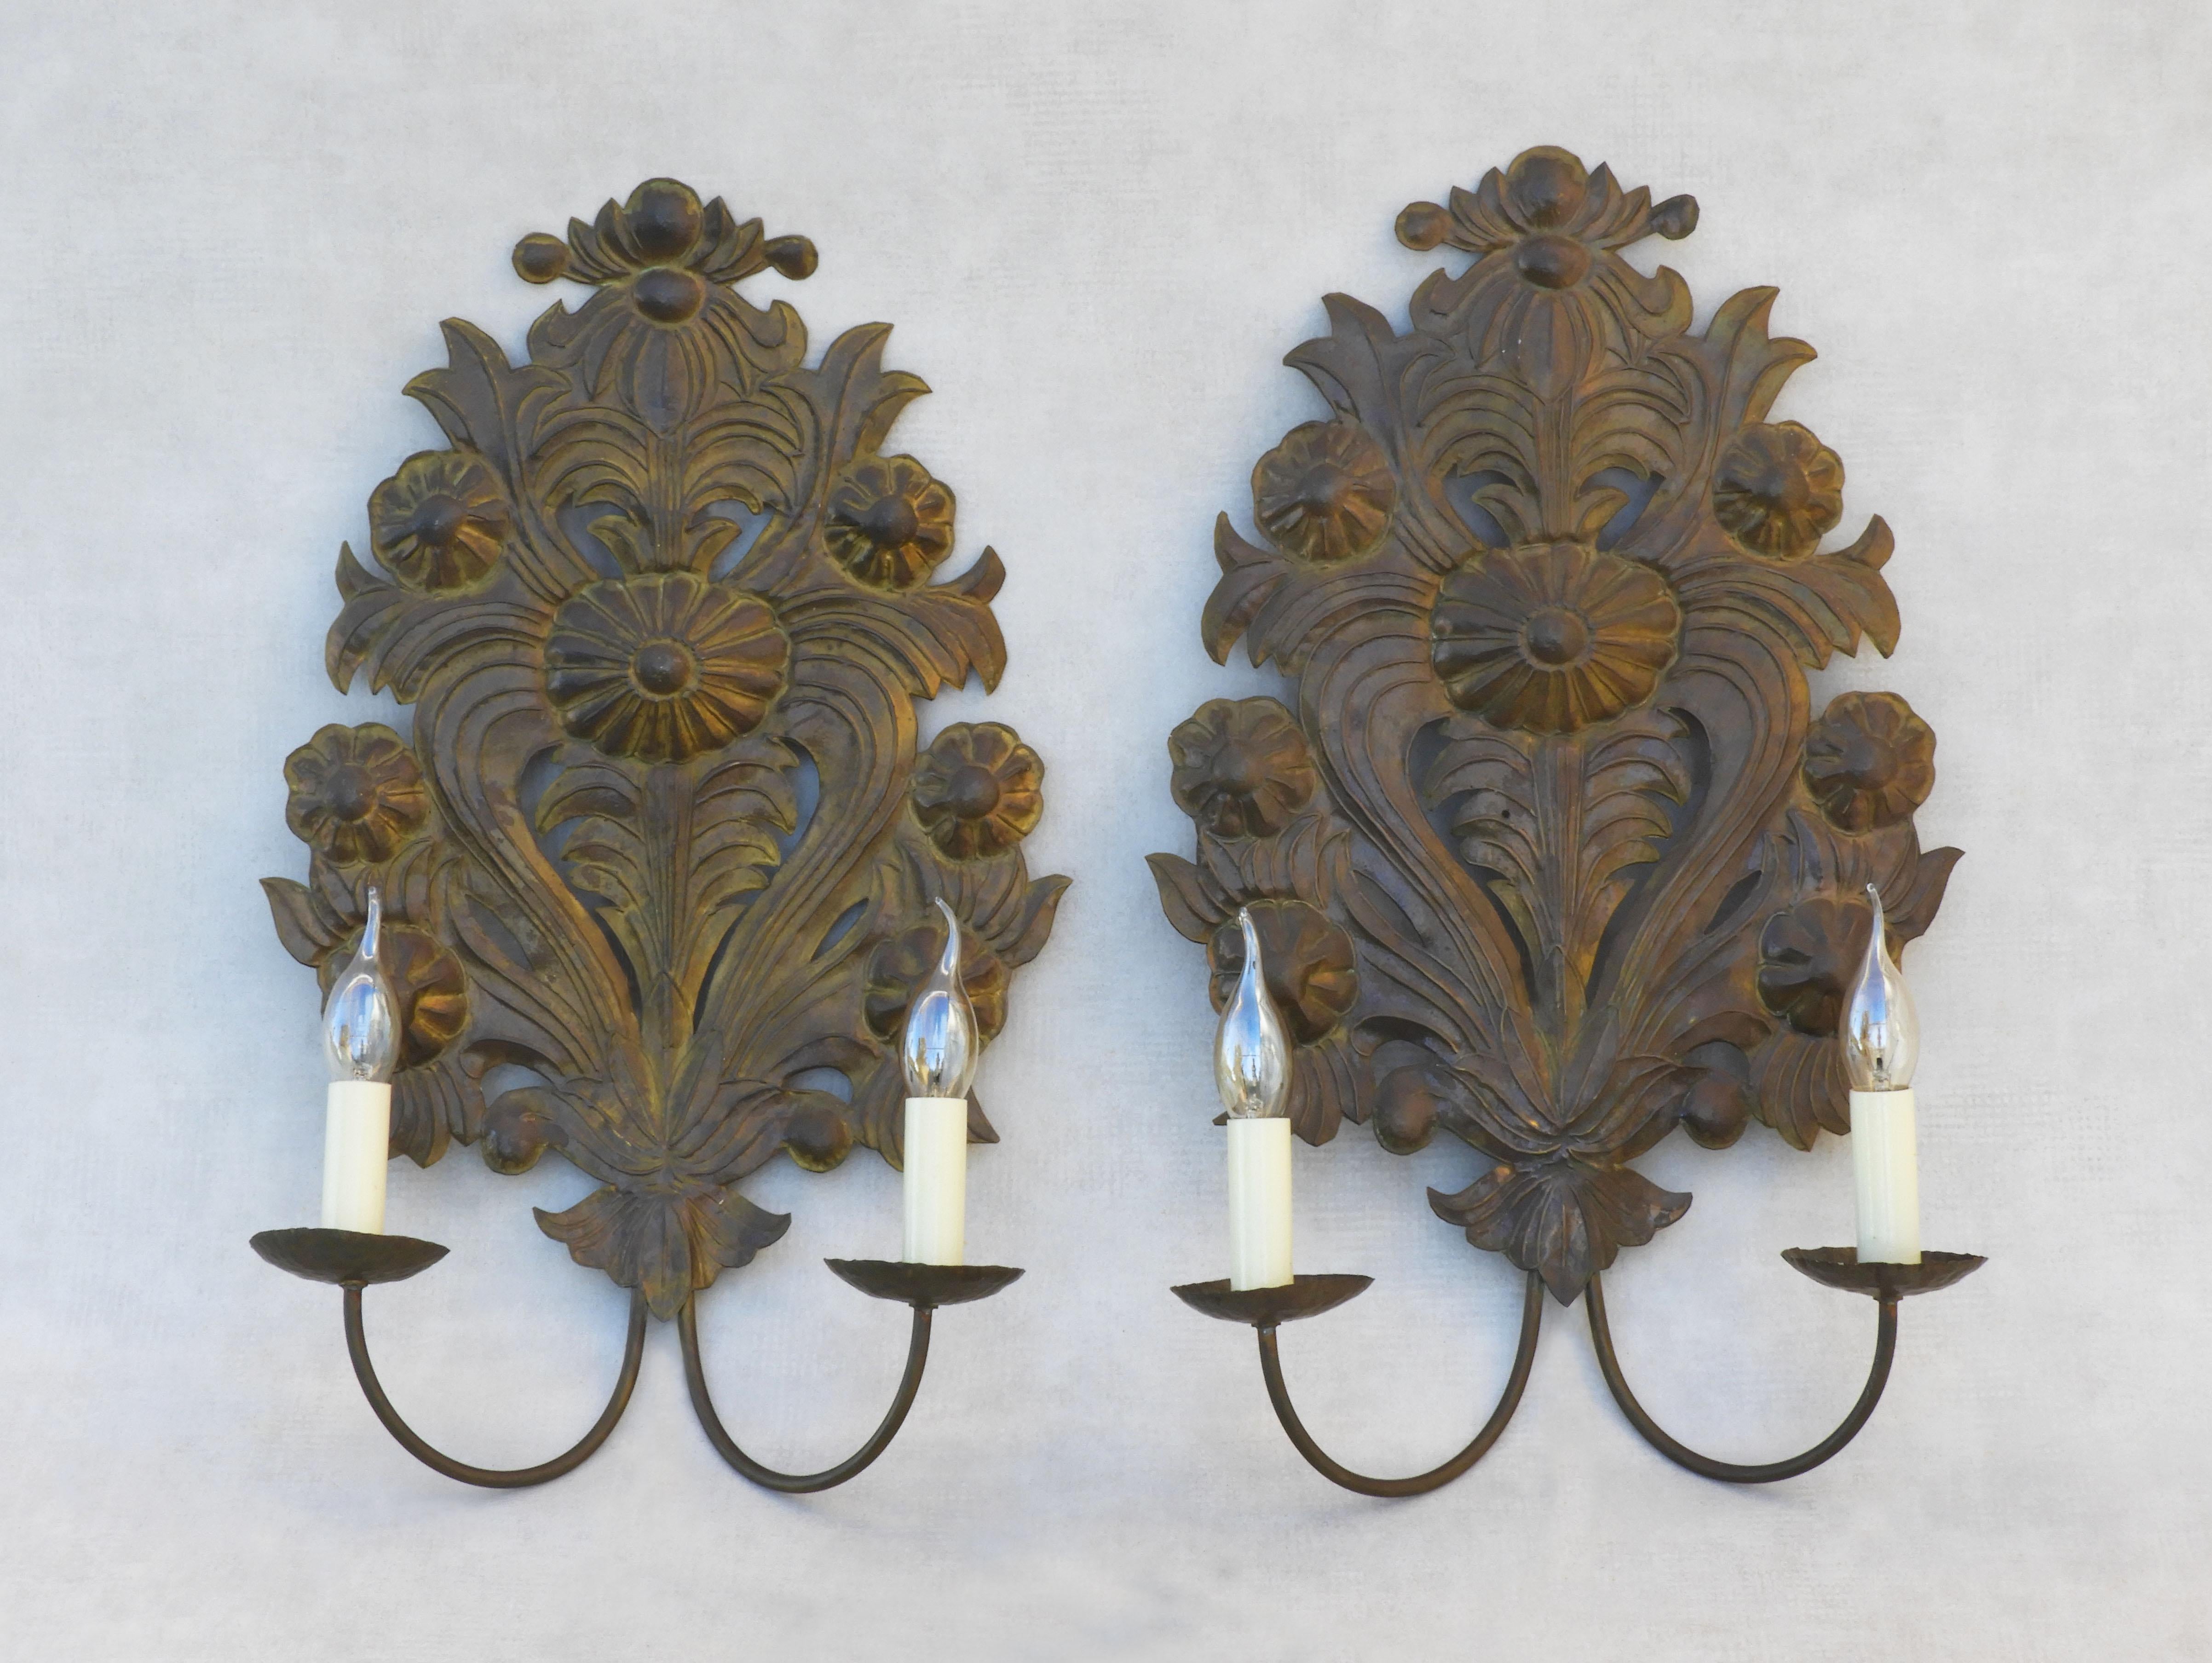 20th Century Pair of Large French Floral Wall Light Sconces Tôle Repoussé C1900 FREE SHIPPING